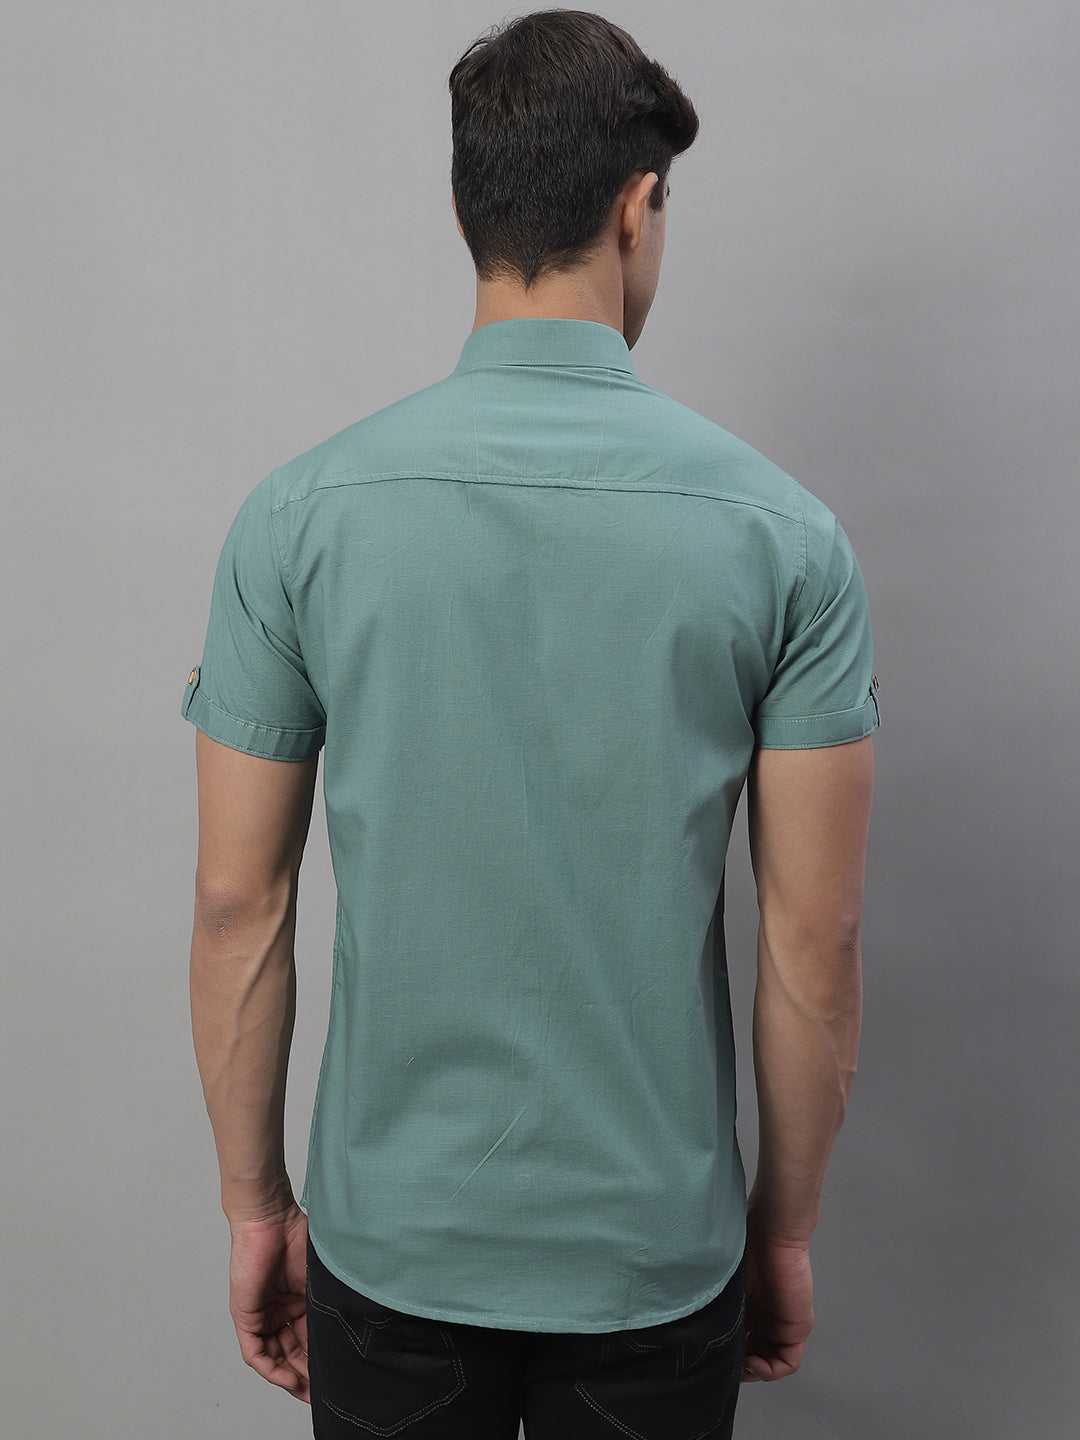 Kicky Pure Cotton Half sleeves Solid Shirt - Dusty Teal